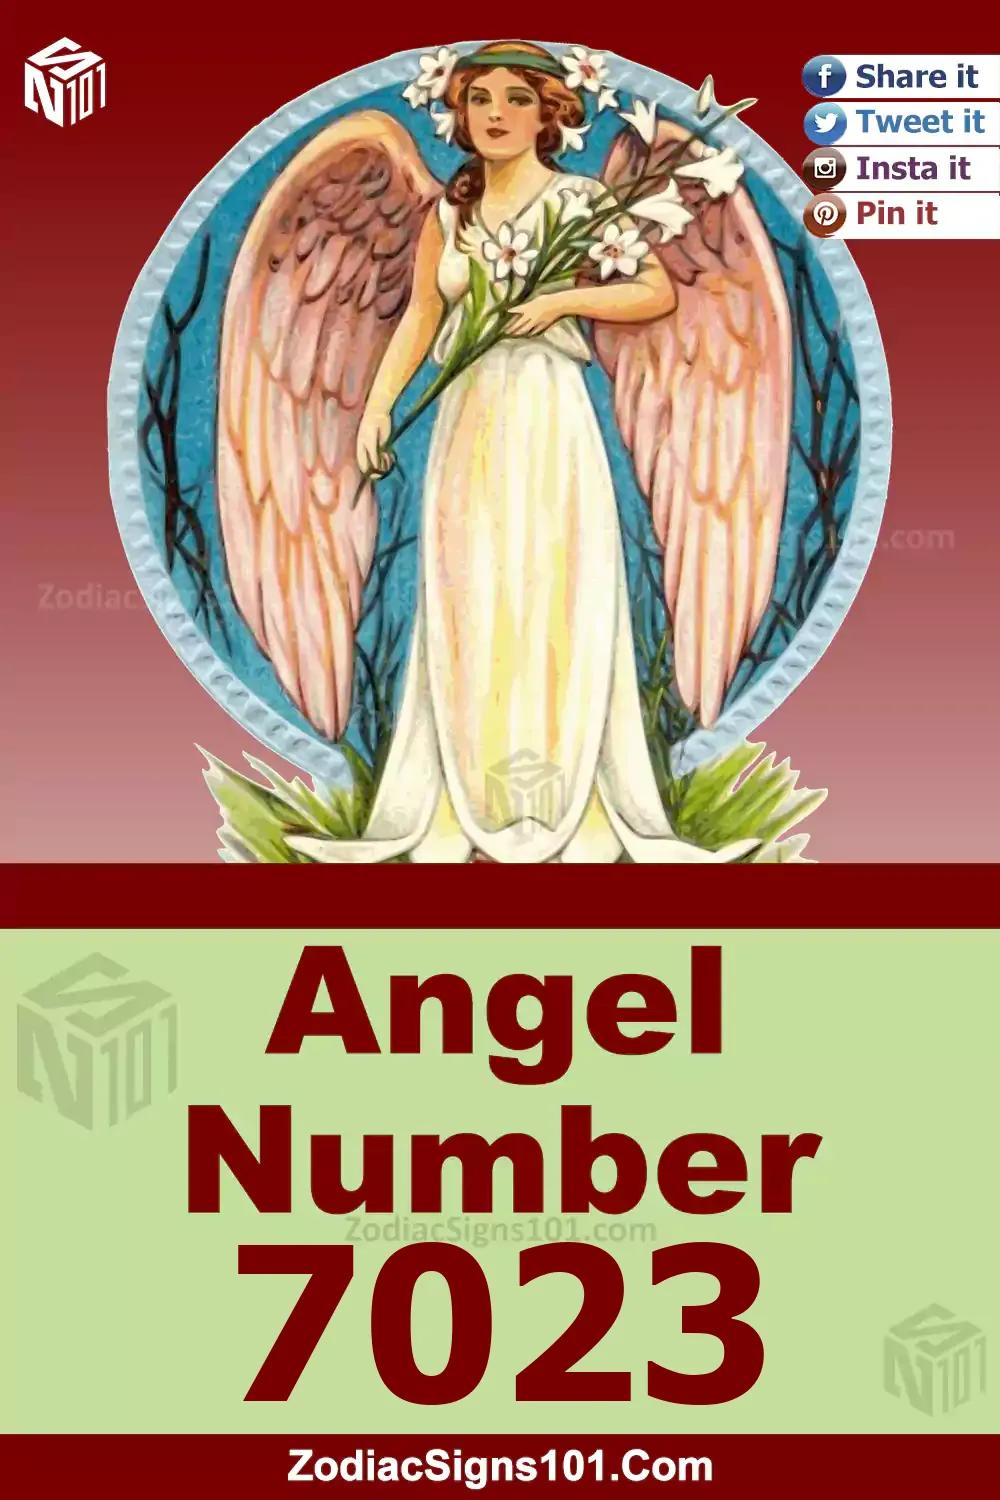 7023 Angel Number Meaning